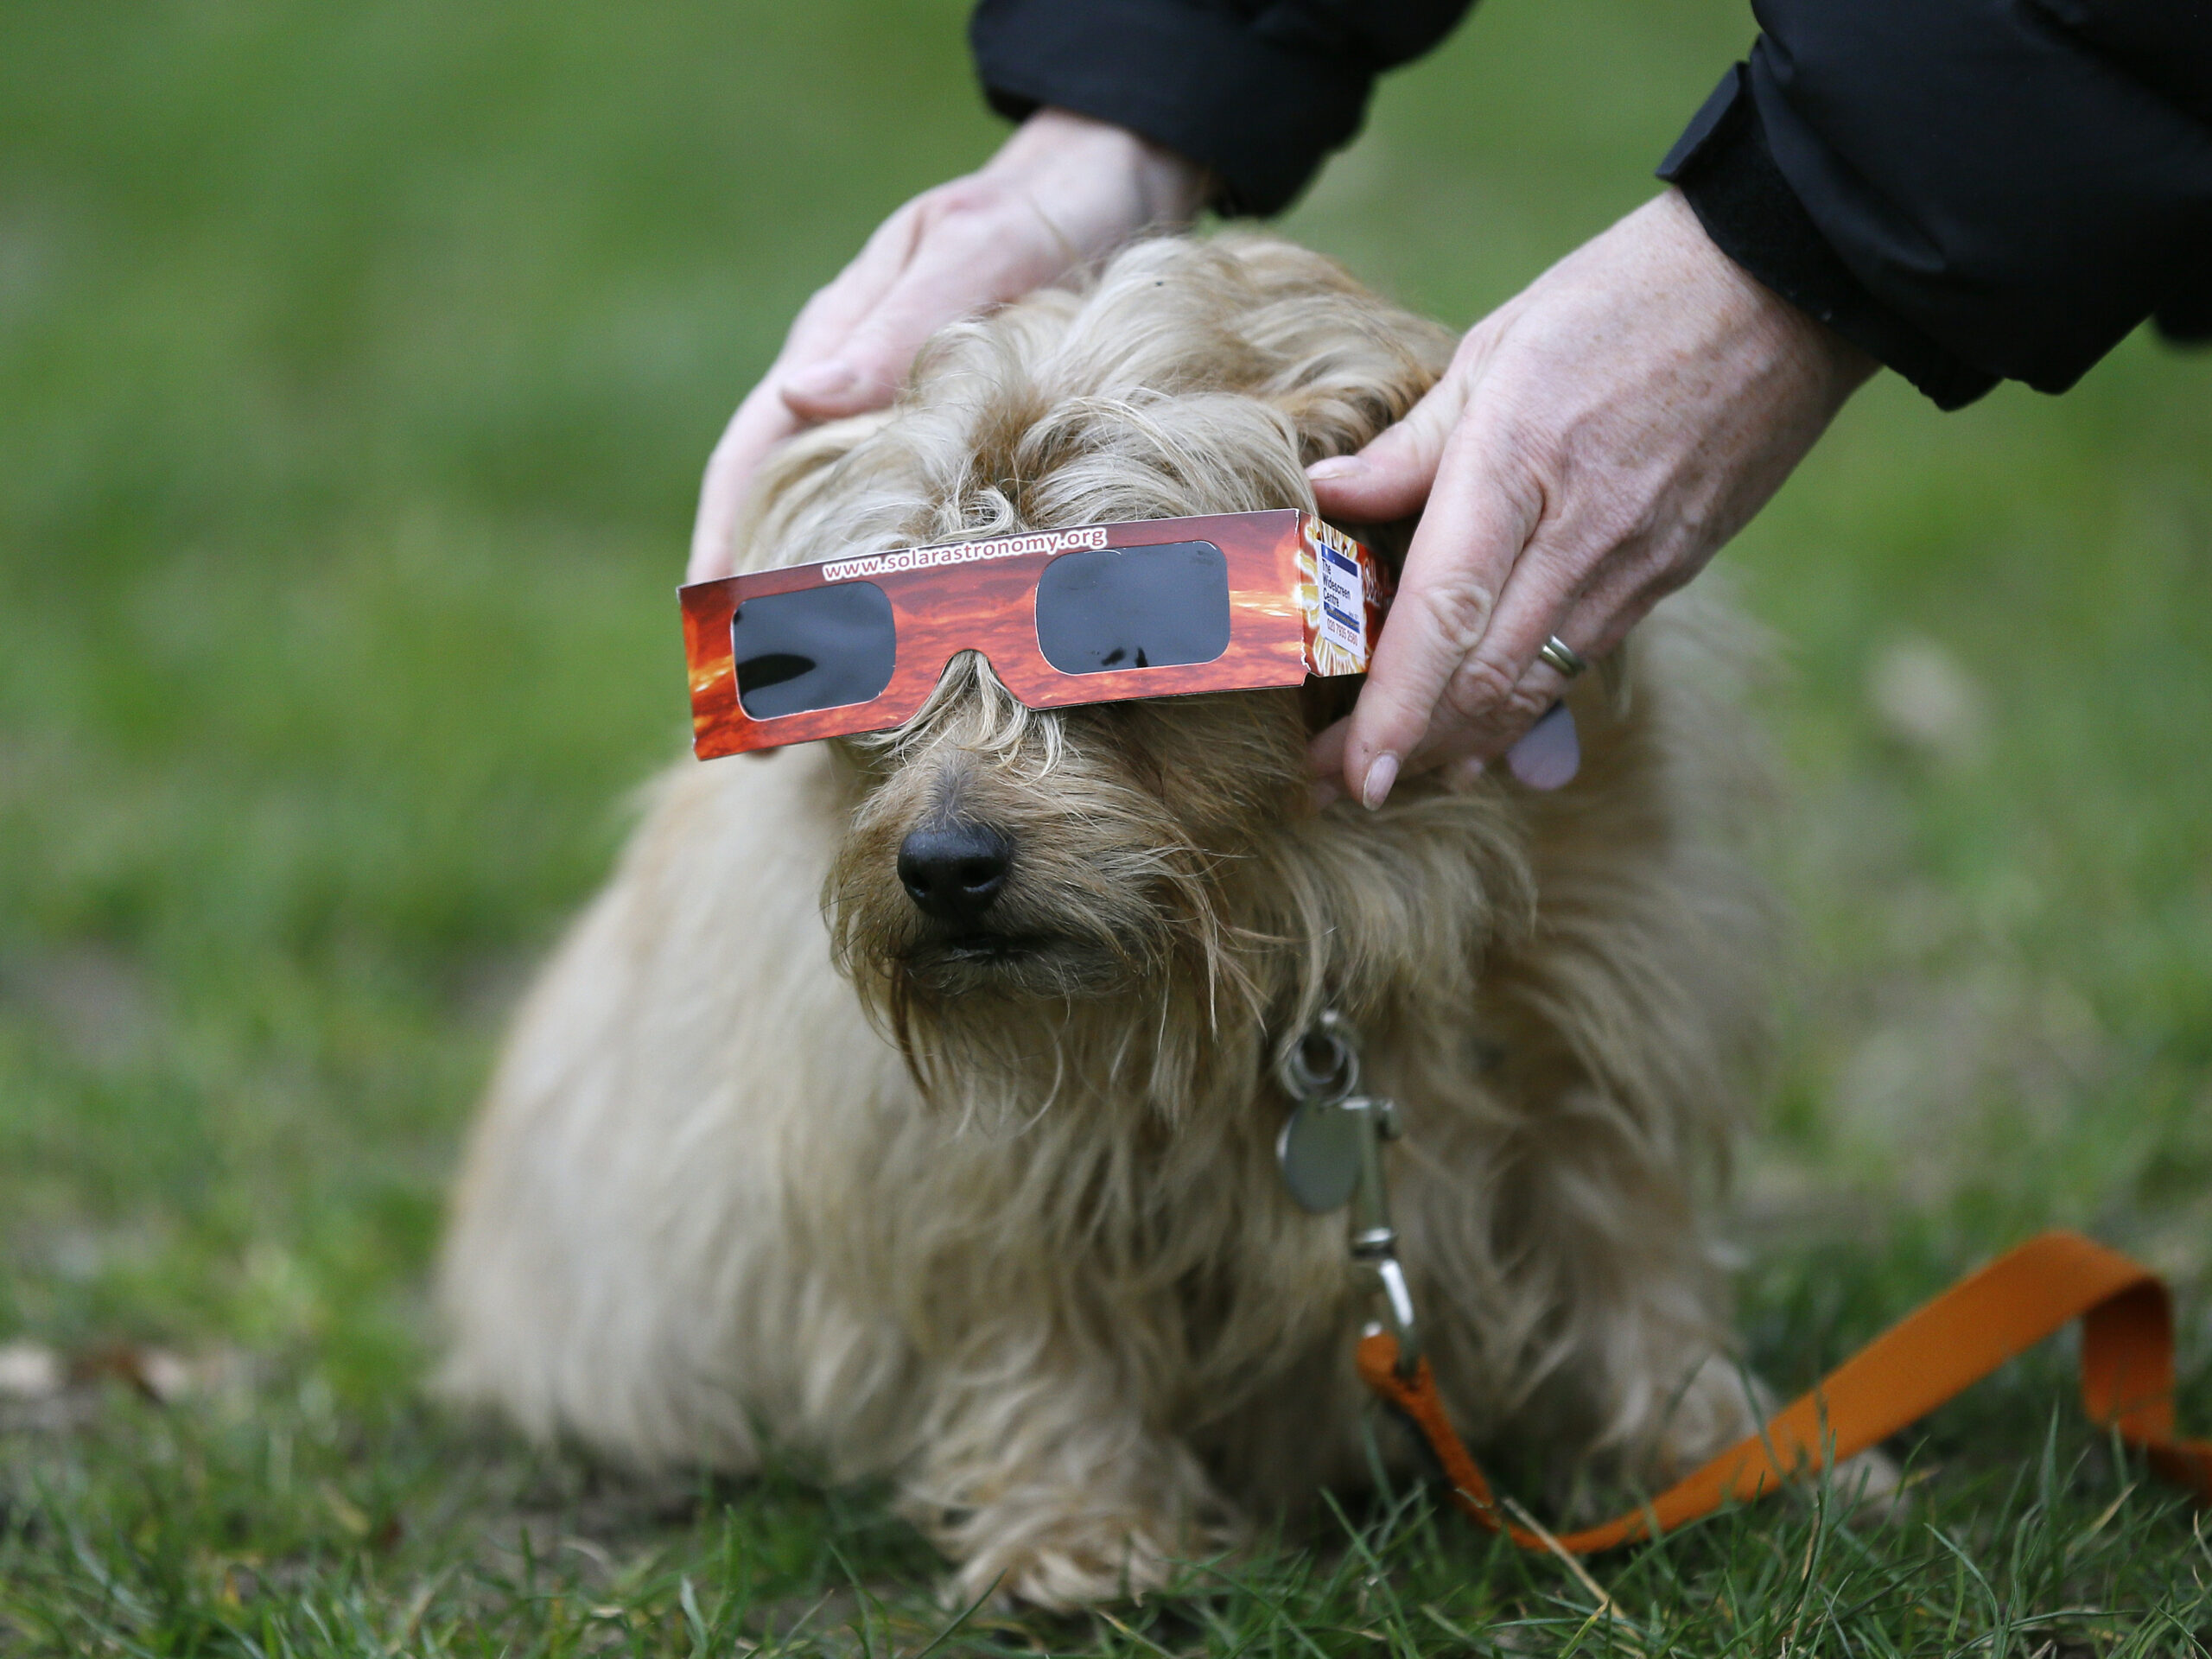 A dog tries on eclipse sunglasses in London in 2015. Experts say pets don't need eclipse sunglasses — in fact, quite the opposite.